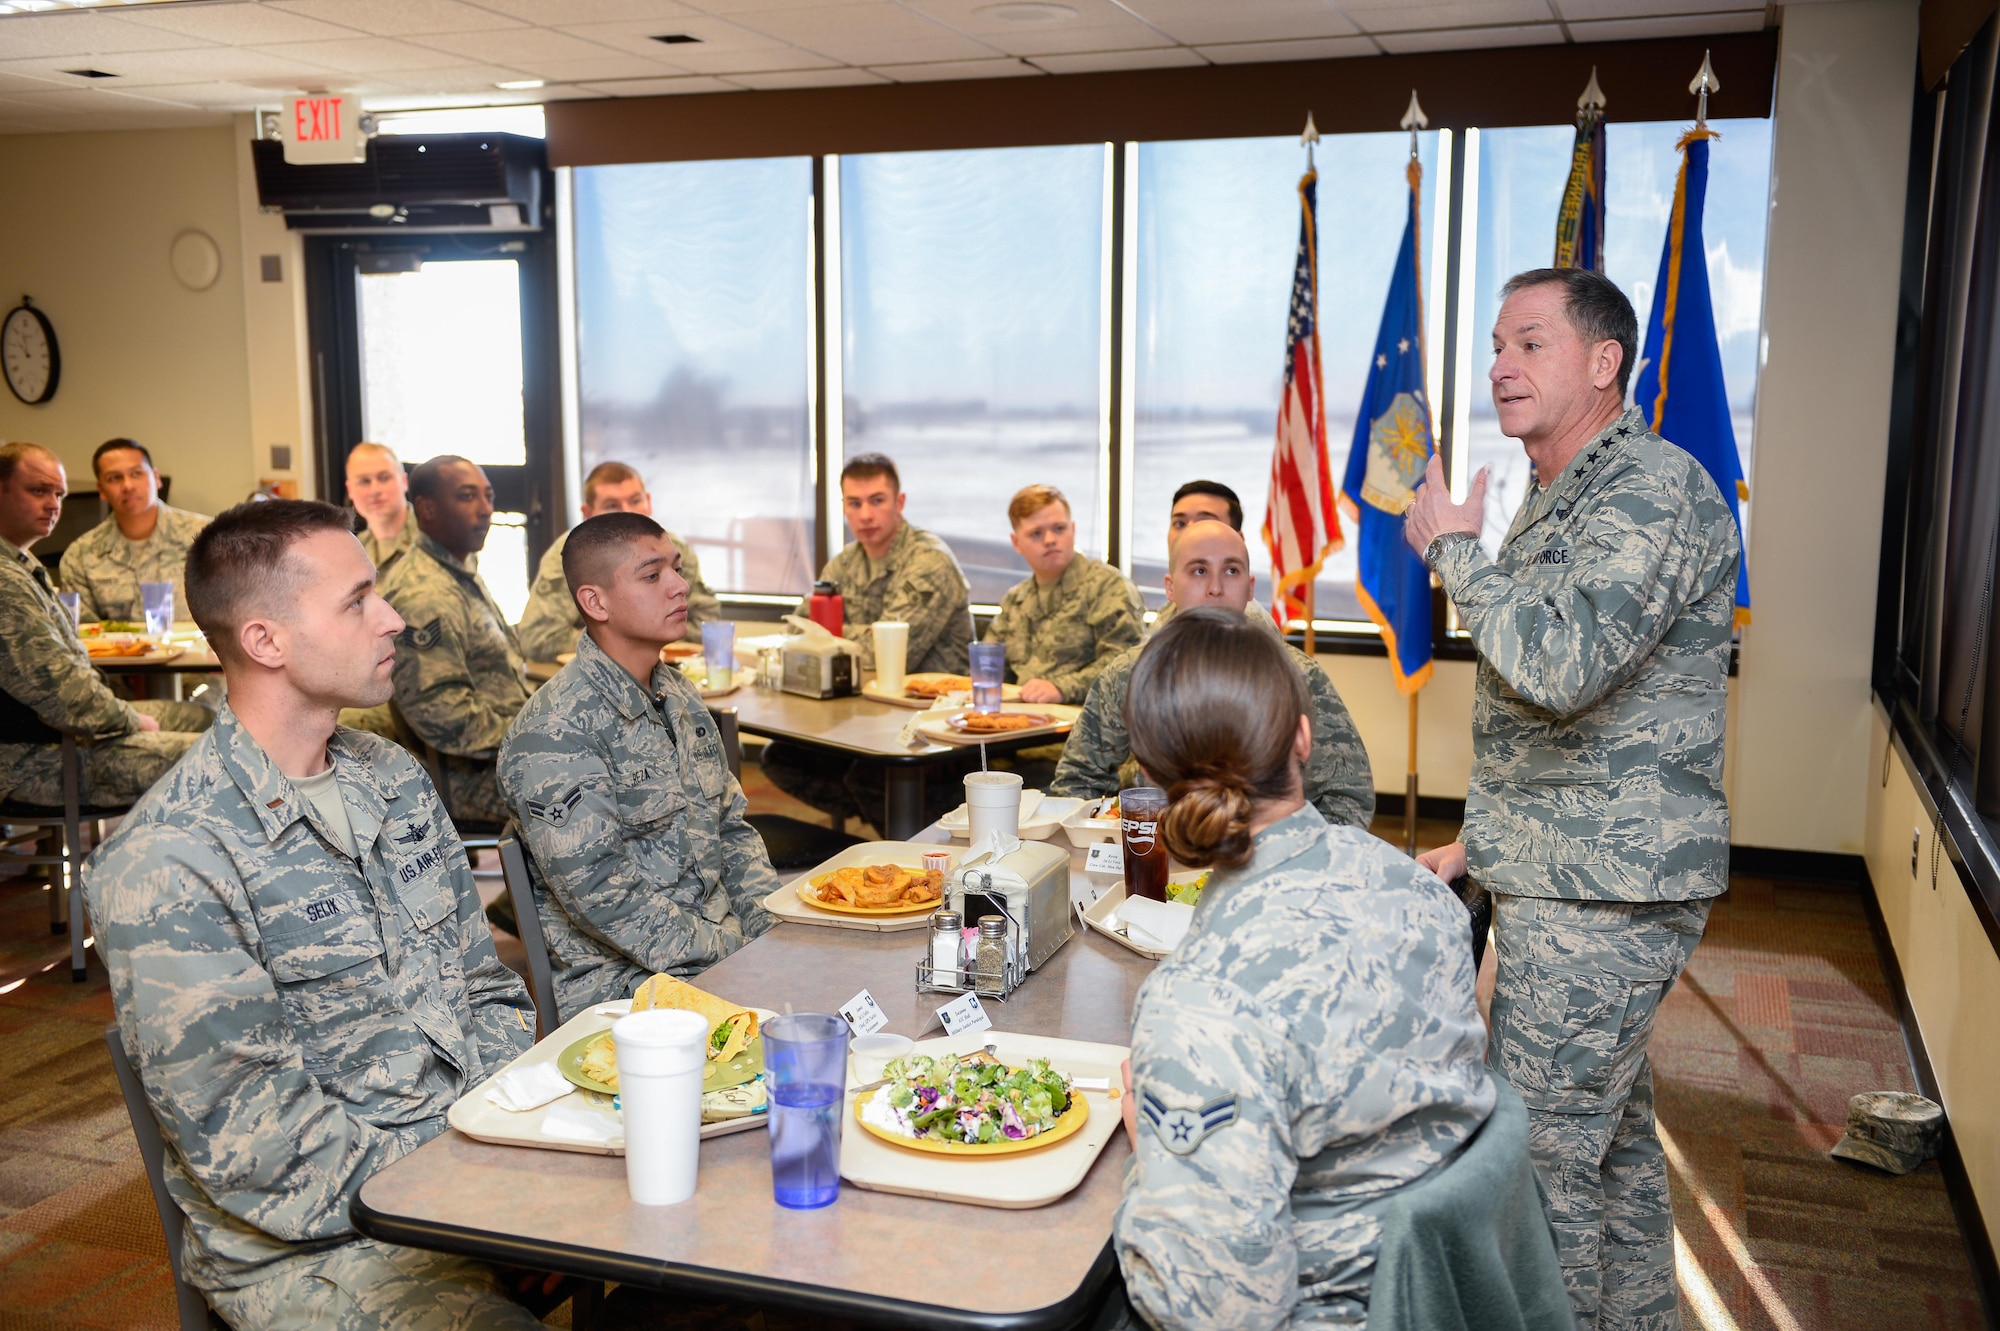 Gen. David L. Goldfein, Chief of Staff of the Air Force, speaks with Schriever Airmen during his visit at Schriever Air Force Base, Colorado, Tuesday, Dec. 20, 2016. Airmen from a multitude of squadrons gathered for discussion with Goldfein. (U.S. Air Force photo/Christopher DeWitt)